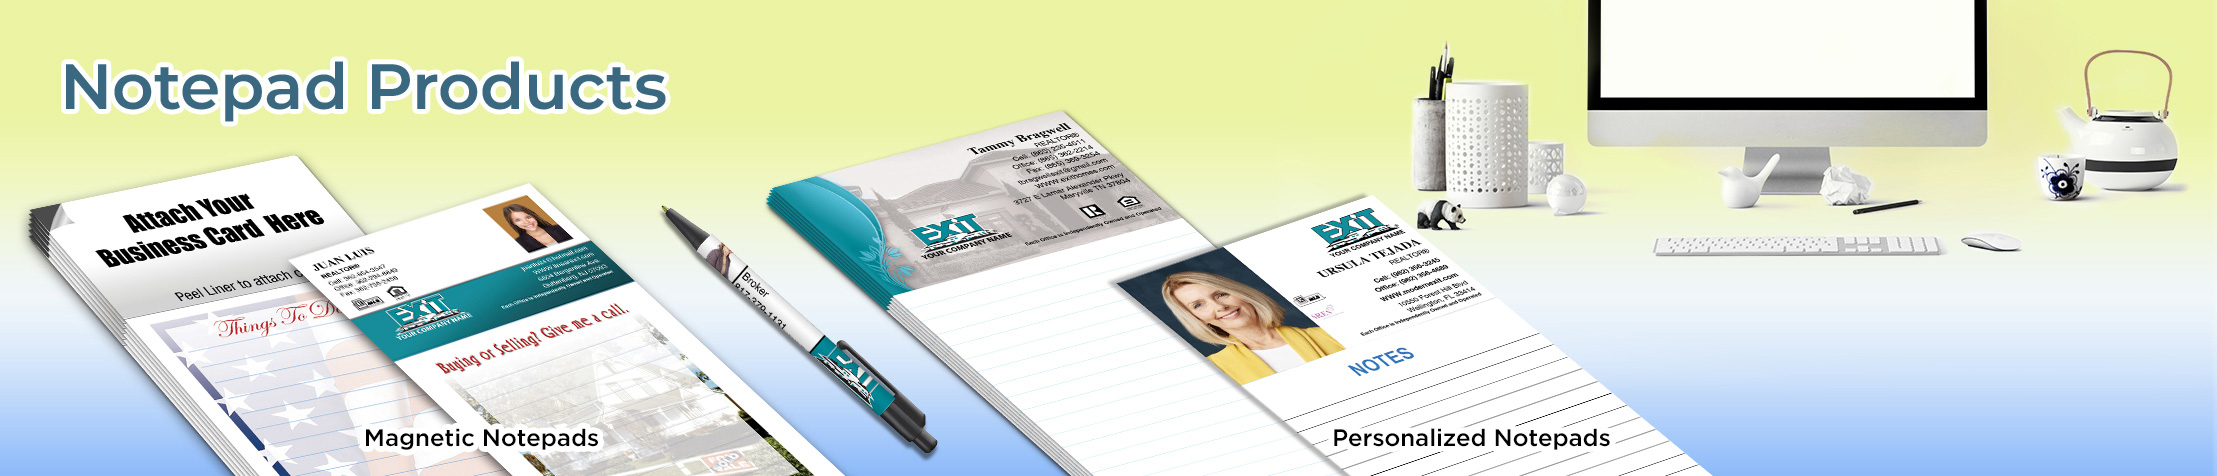 Exit Realty Notepads - Exit Realty approved vendor custom stationery and marketing tools, magnetic and personalized notepads | BestPrintBuy.com